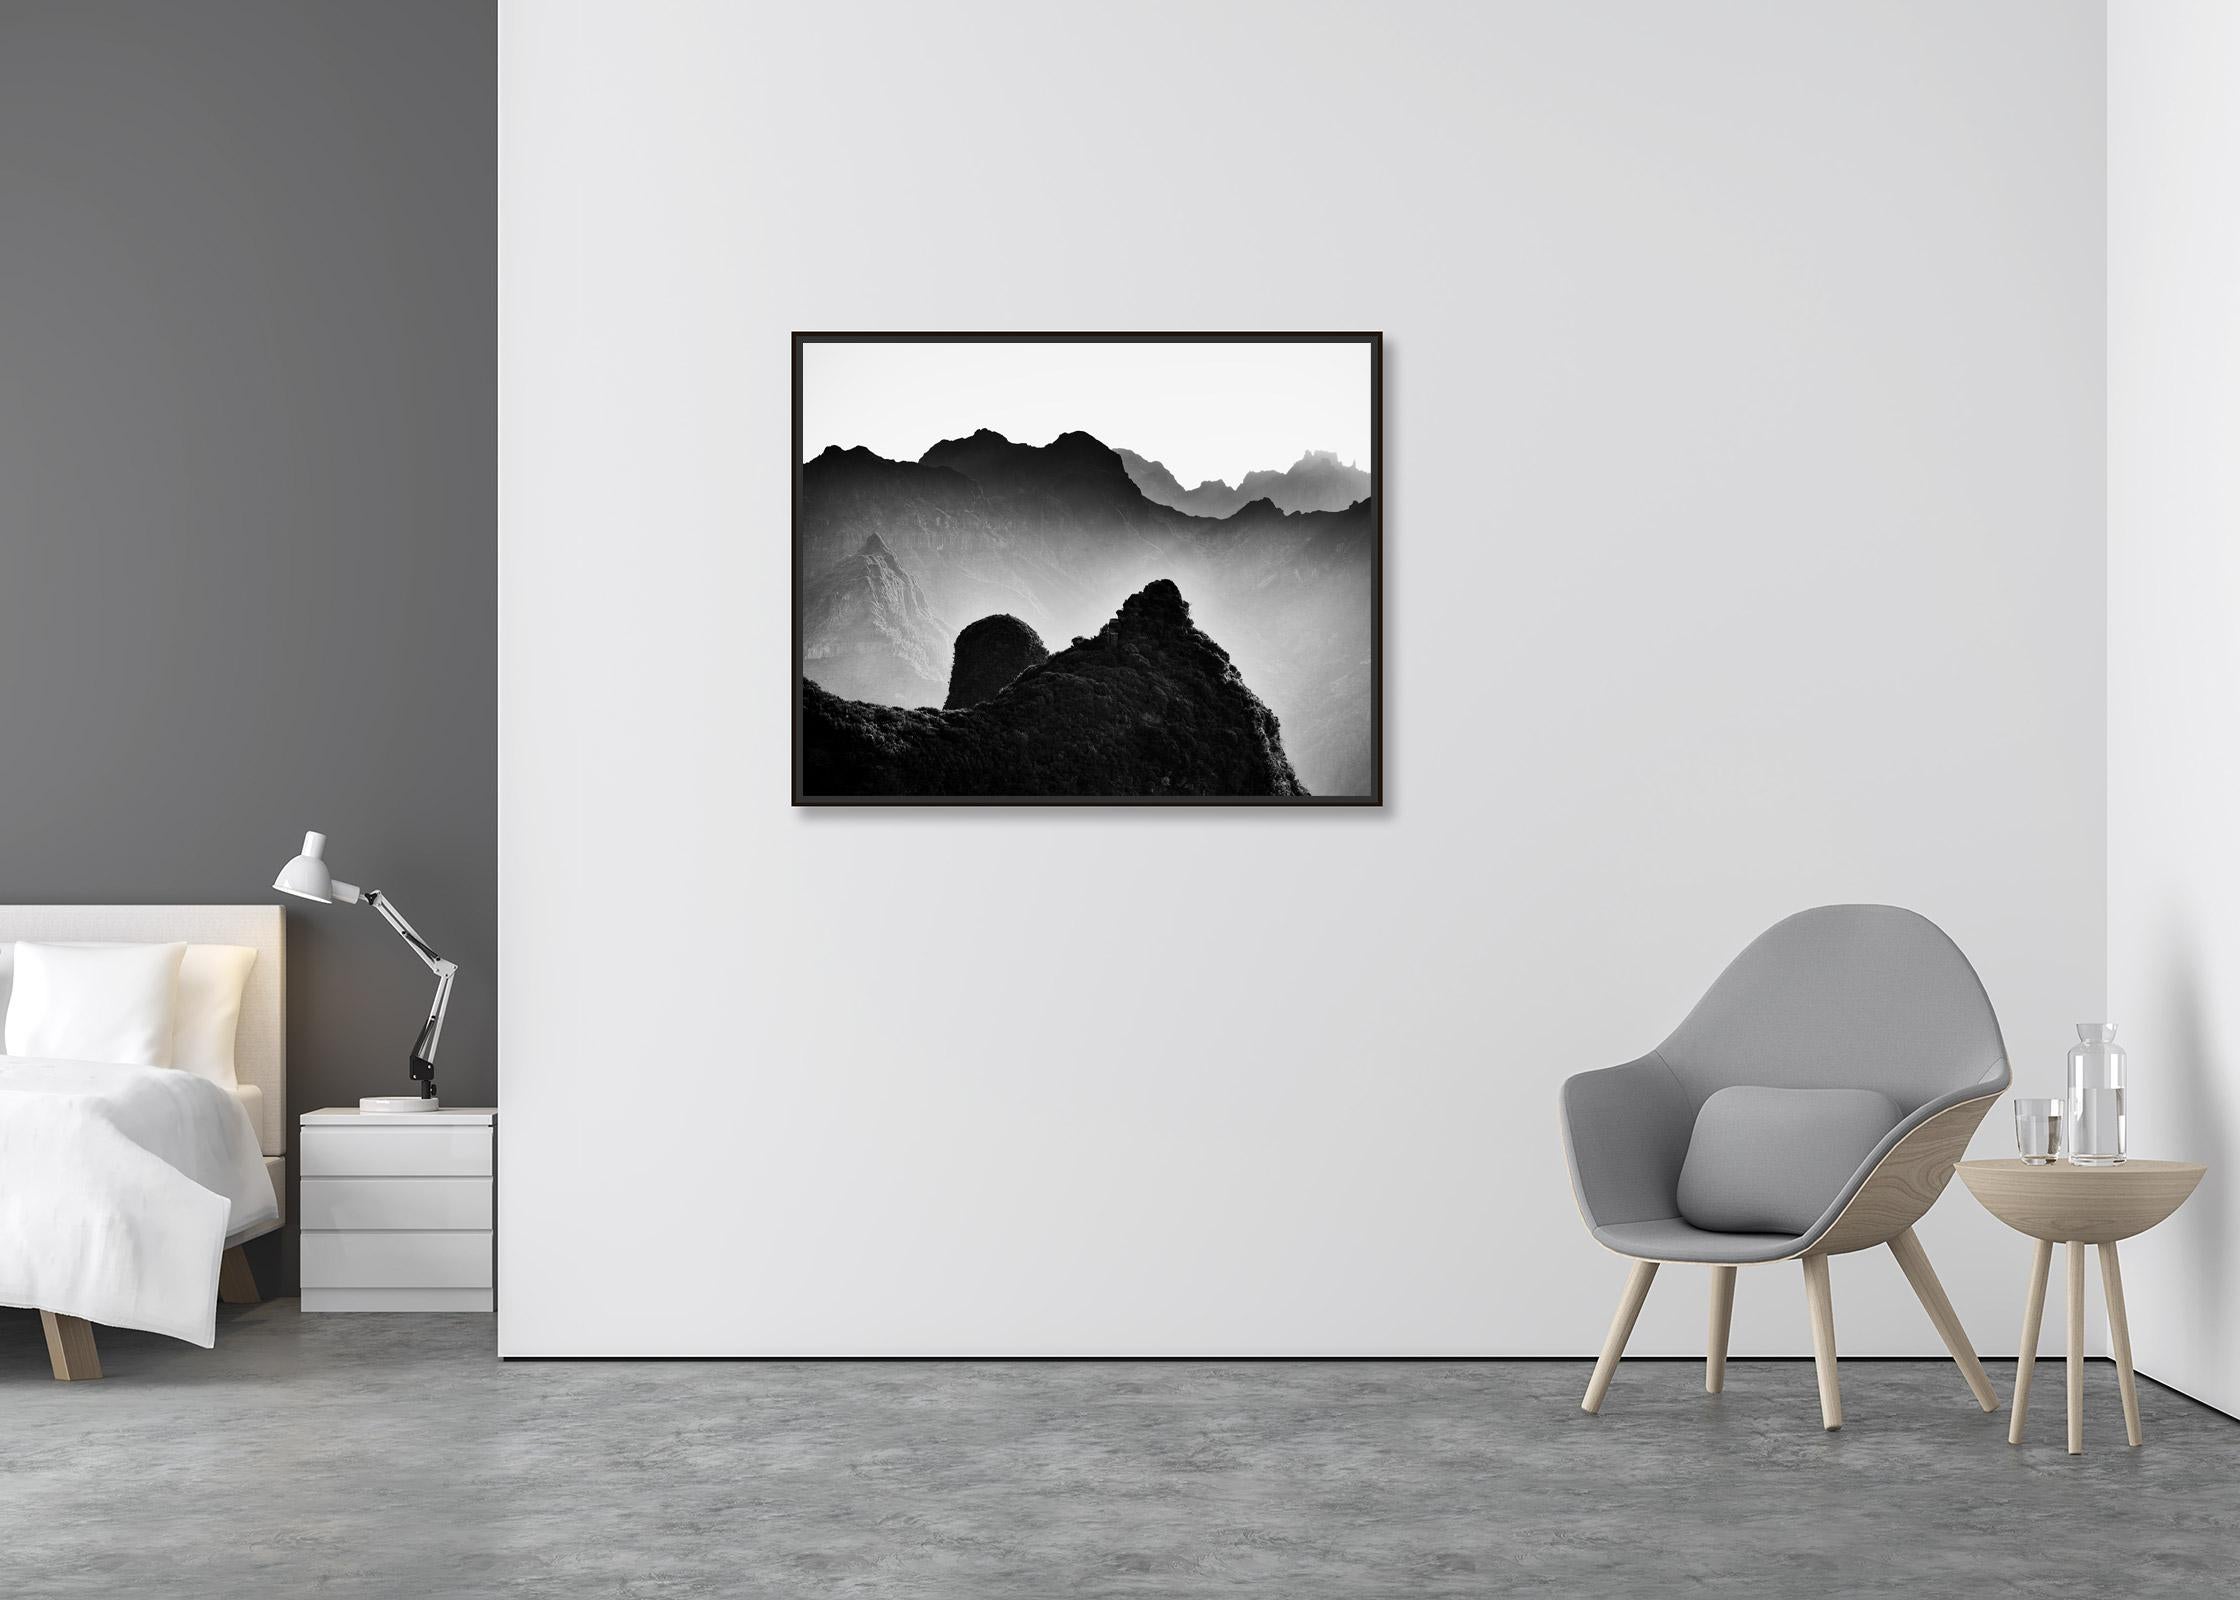 Madeira Peaks, Sunrise, Shadow Mountains, black and white photography, landscape - Contemporary Photograph by Gerald Berghammer